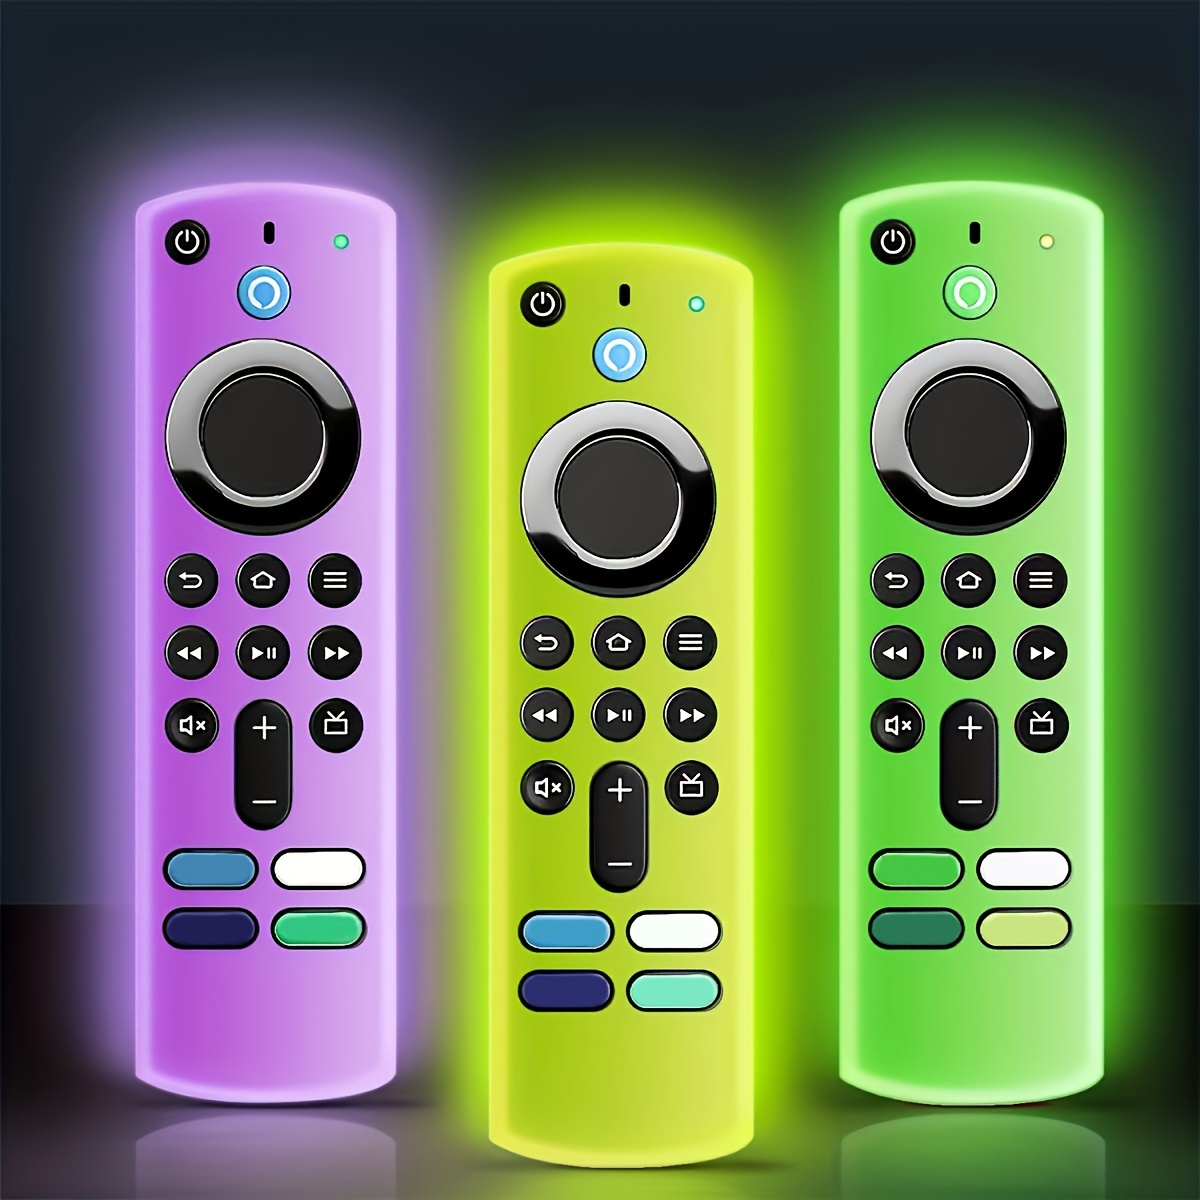 

1 Piece Control Set With Lanyard Glow In The Night, Tv 4k Remote Control Set Third Generation, Purple Blue Green